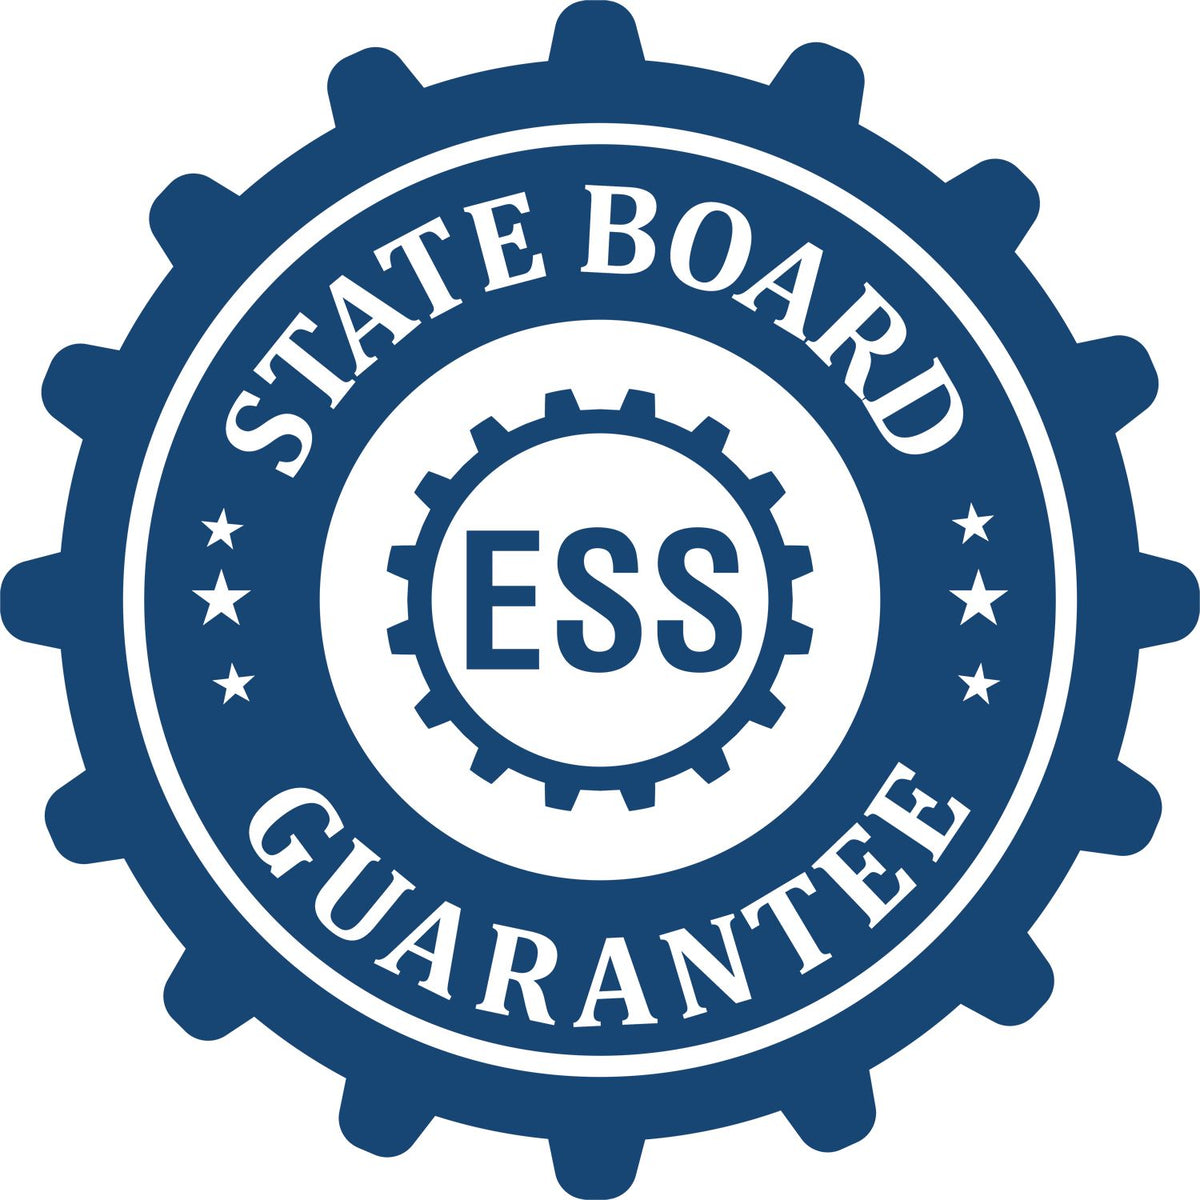 An emblem in a gear shape illustrating a state board guarantee for the Gift Arizona Landscape Architect Seal